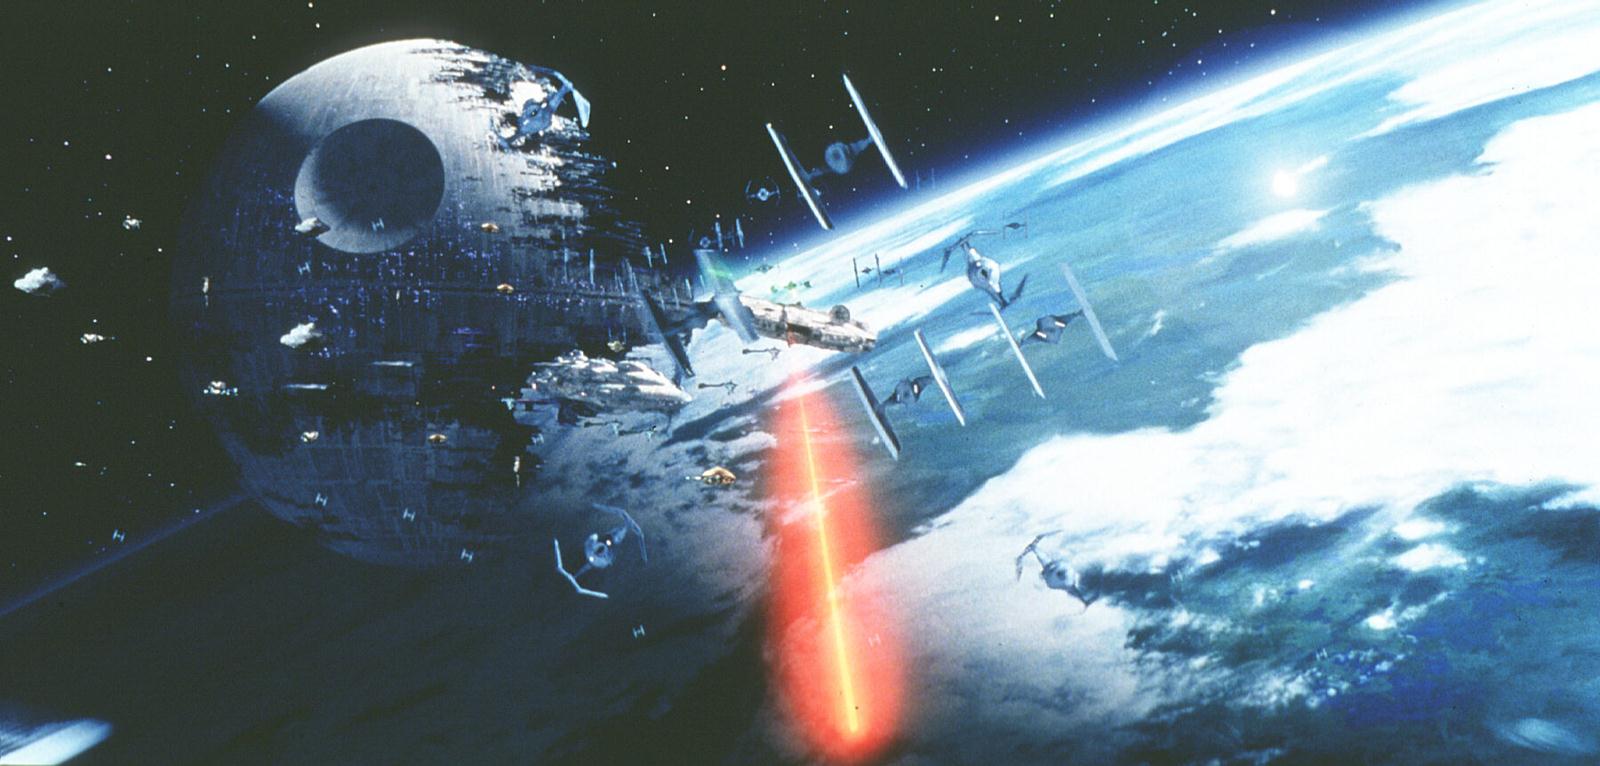 Most Viewed Return Of The Jedi Death Star Battle Wallpapers 4k Wallpapers